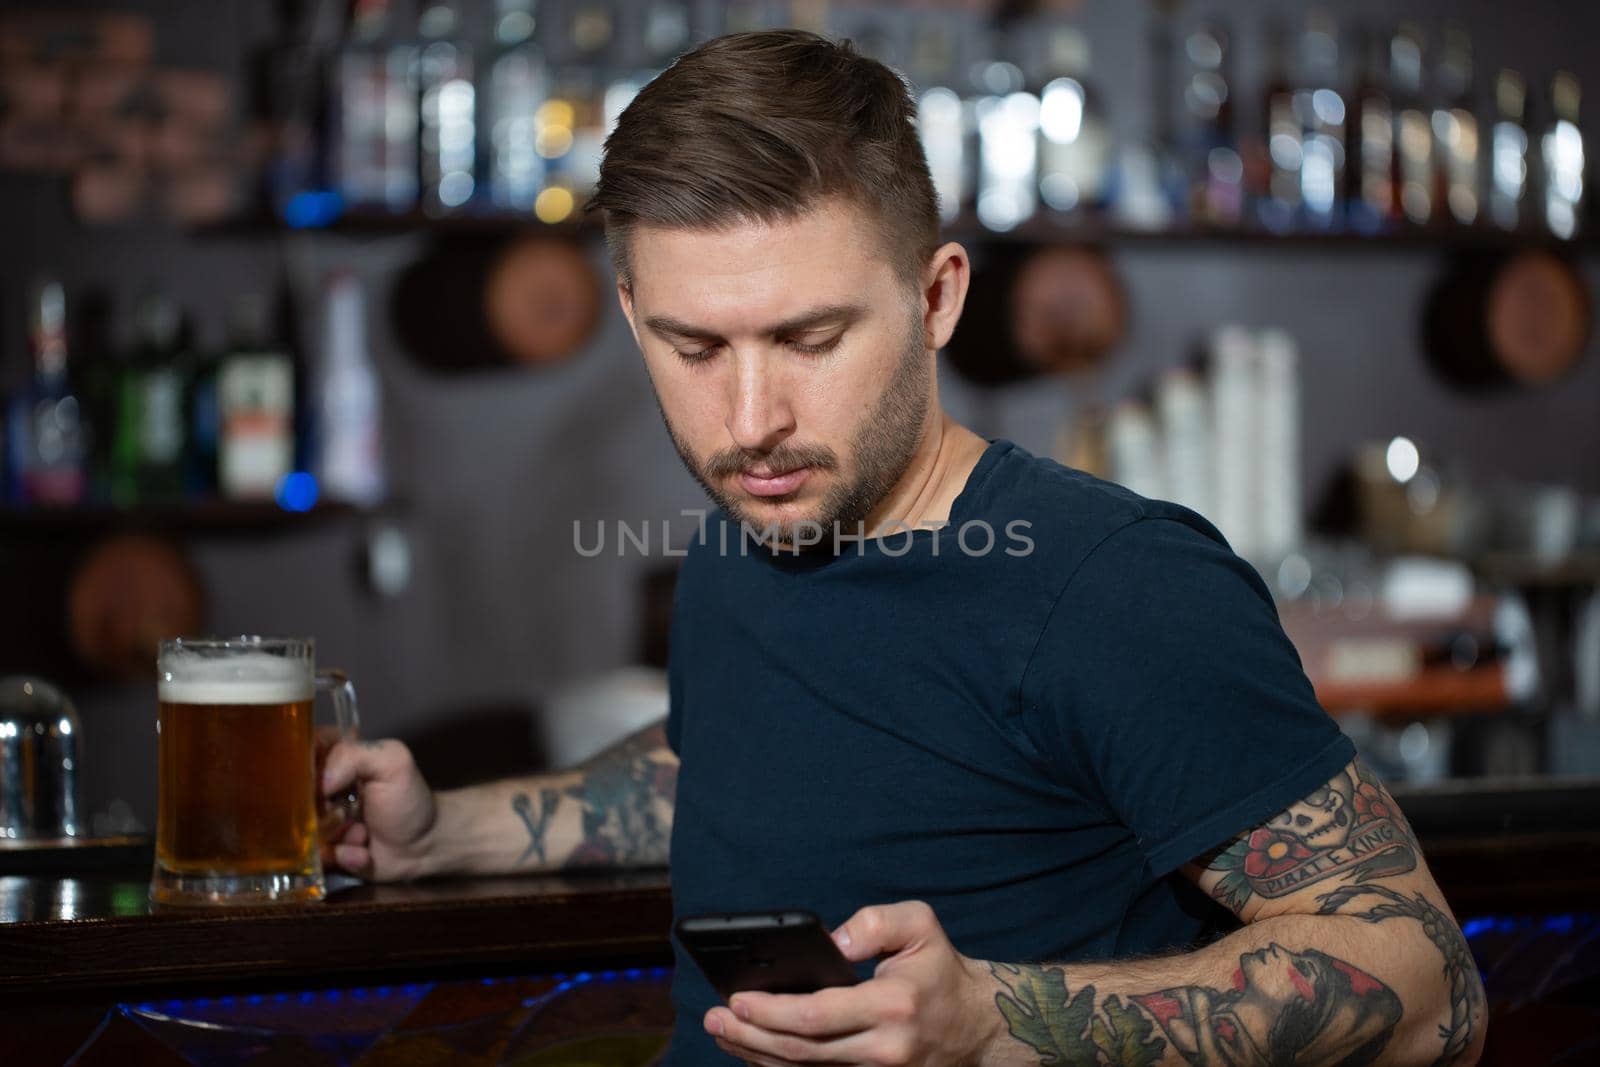 Young man sitting at bar counter with a pint of light beer. by StudioPeace